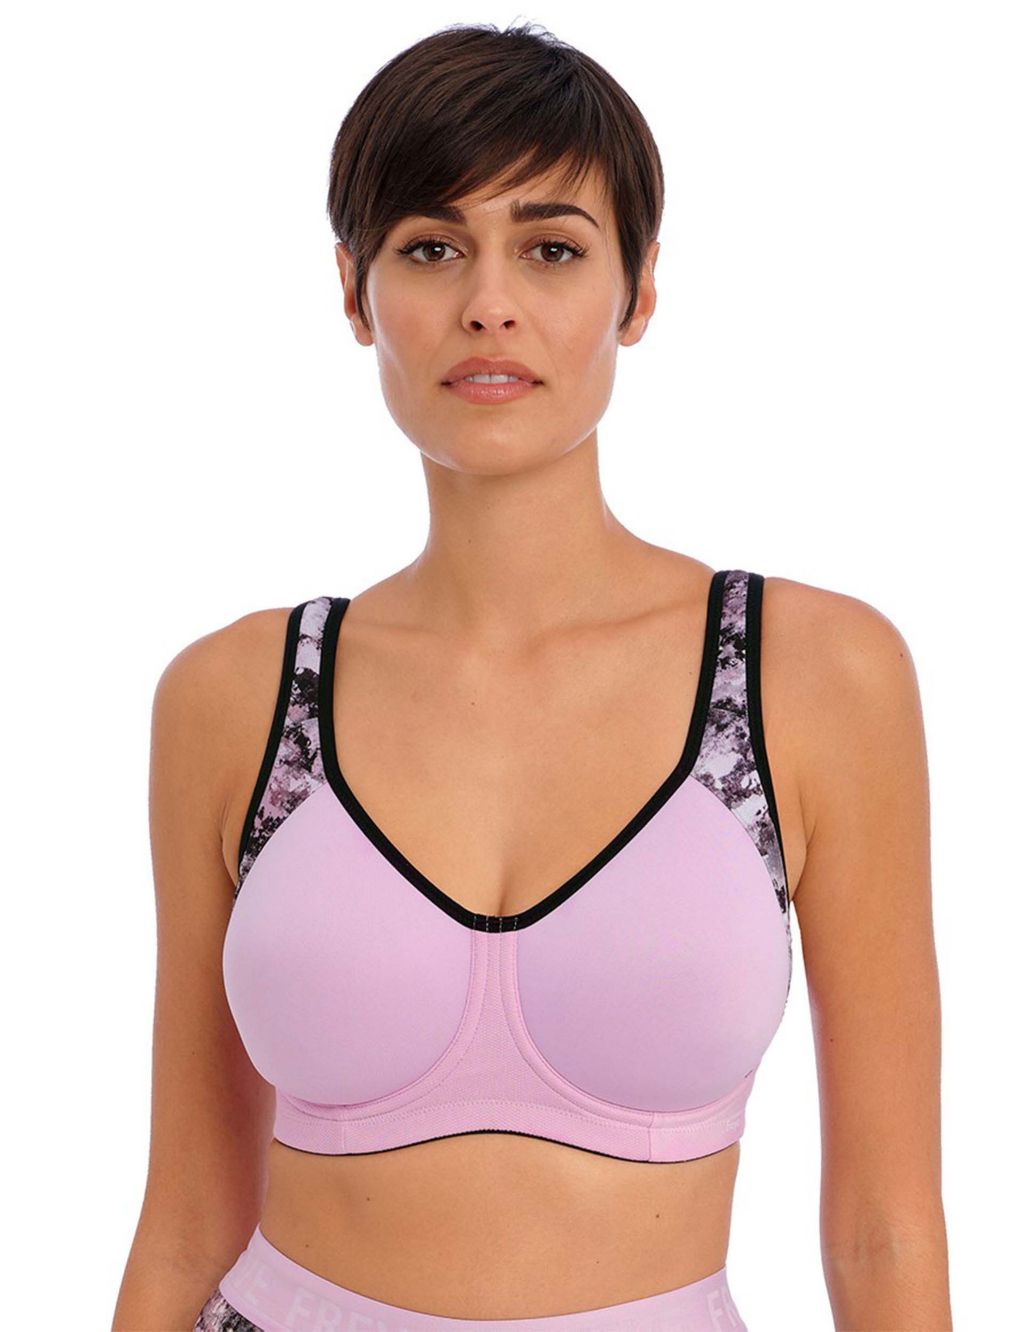 M&S SPORTS BRA High Impact Non Wired 32A (Last one) PINK BNWT £14.50 -  PicClick UK